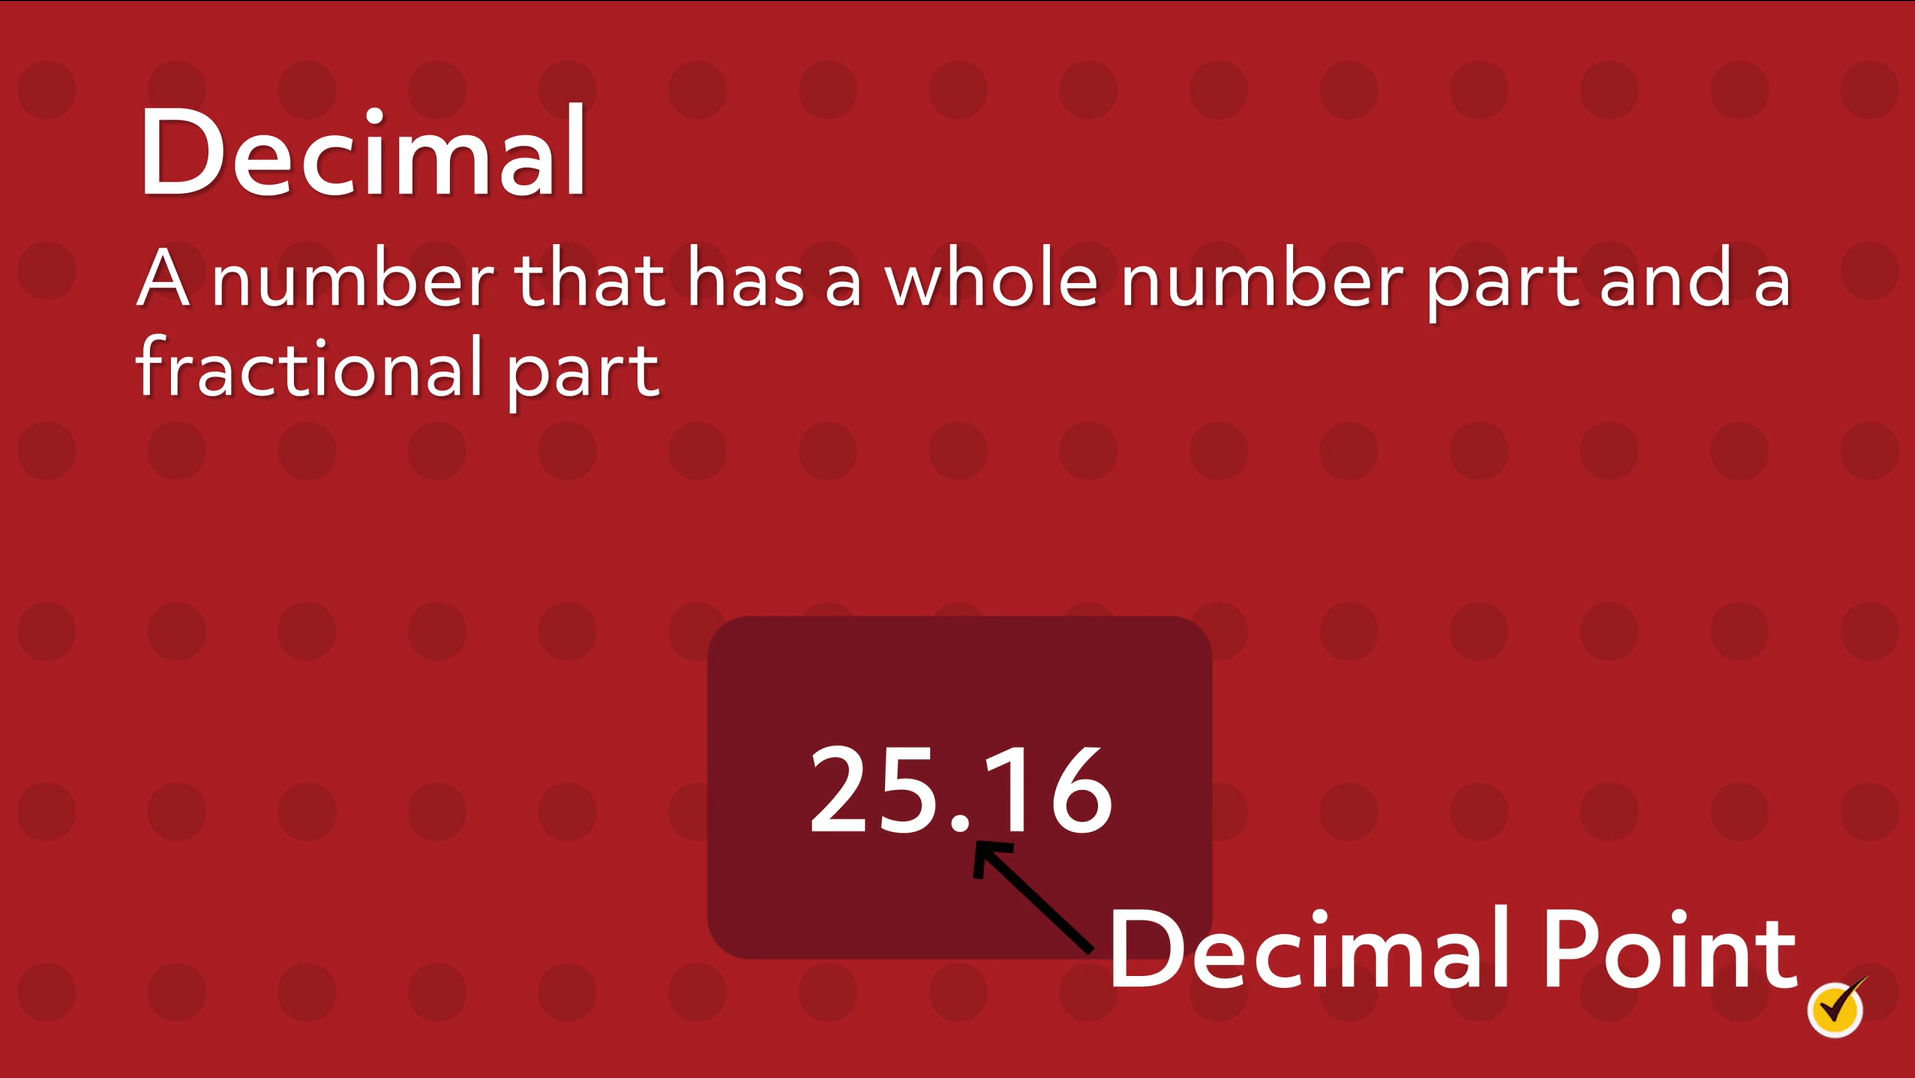 A decimal point goes between the whole number part and the fractional part of a decimal